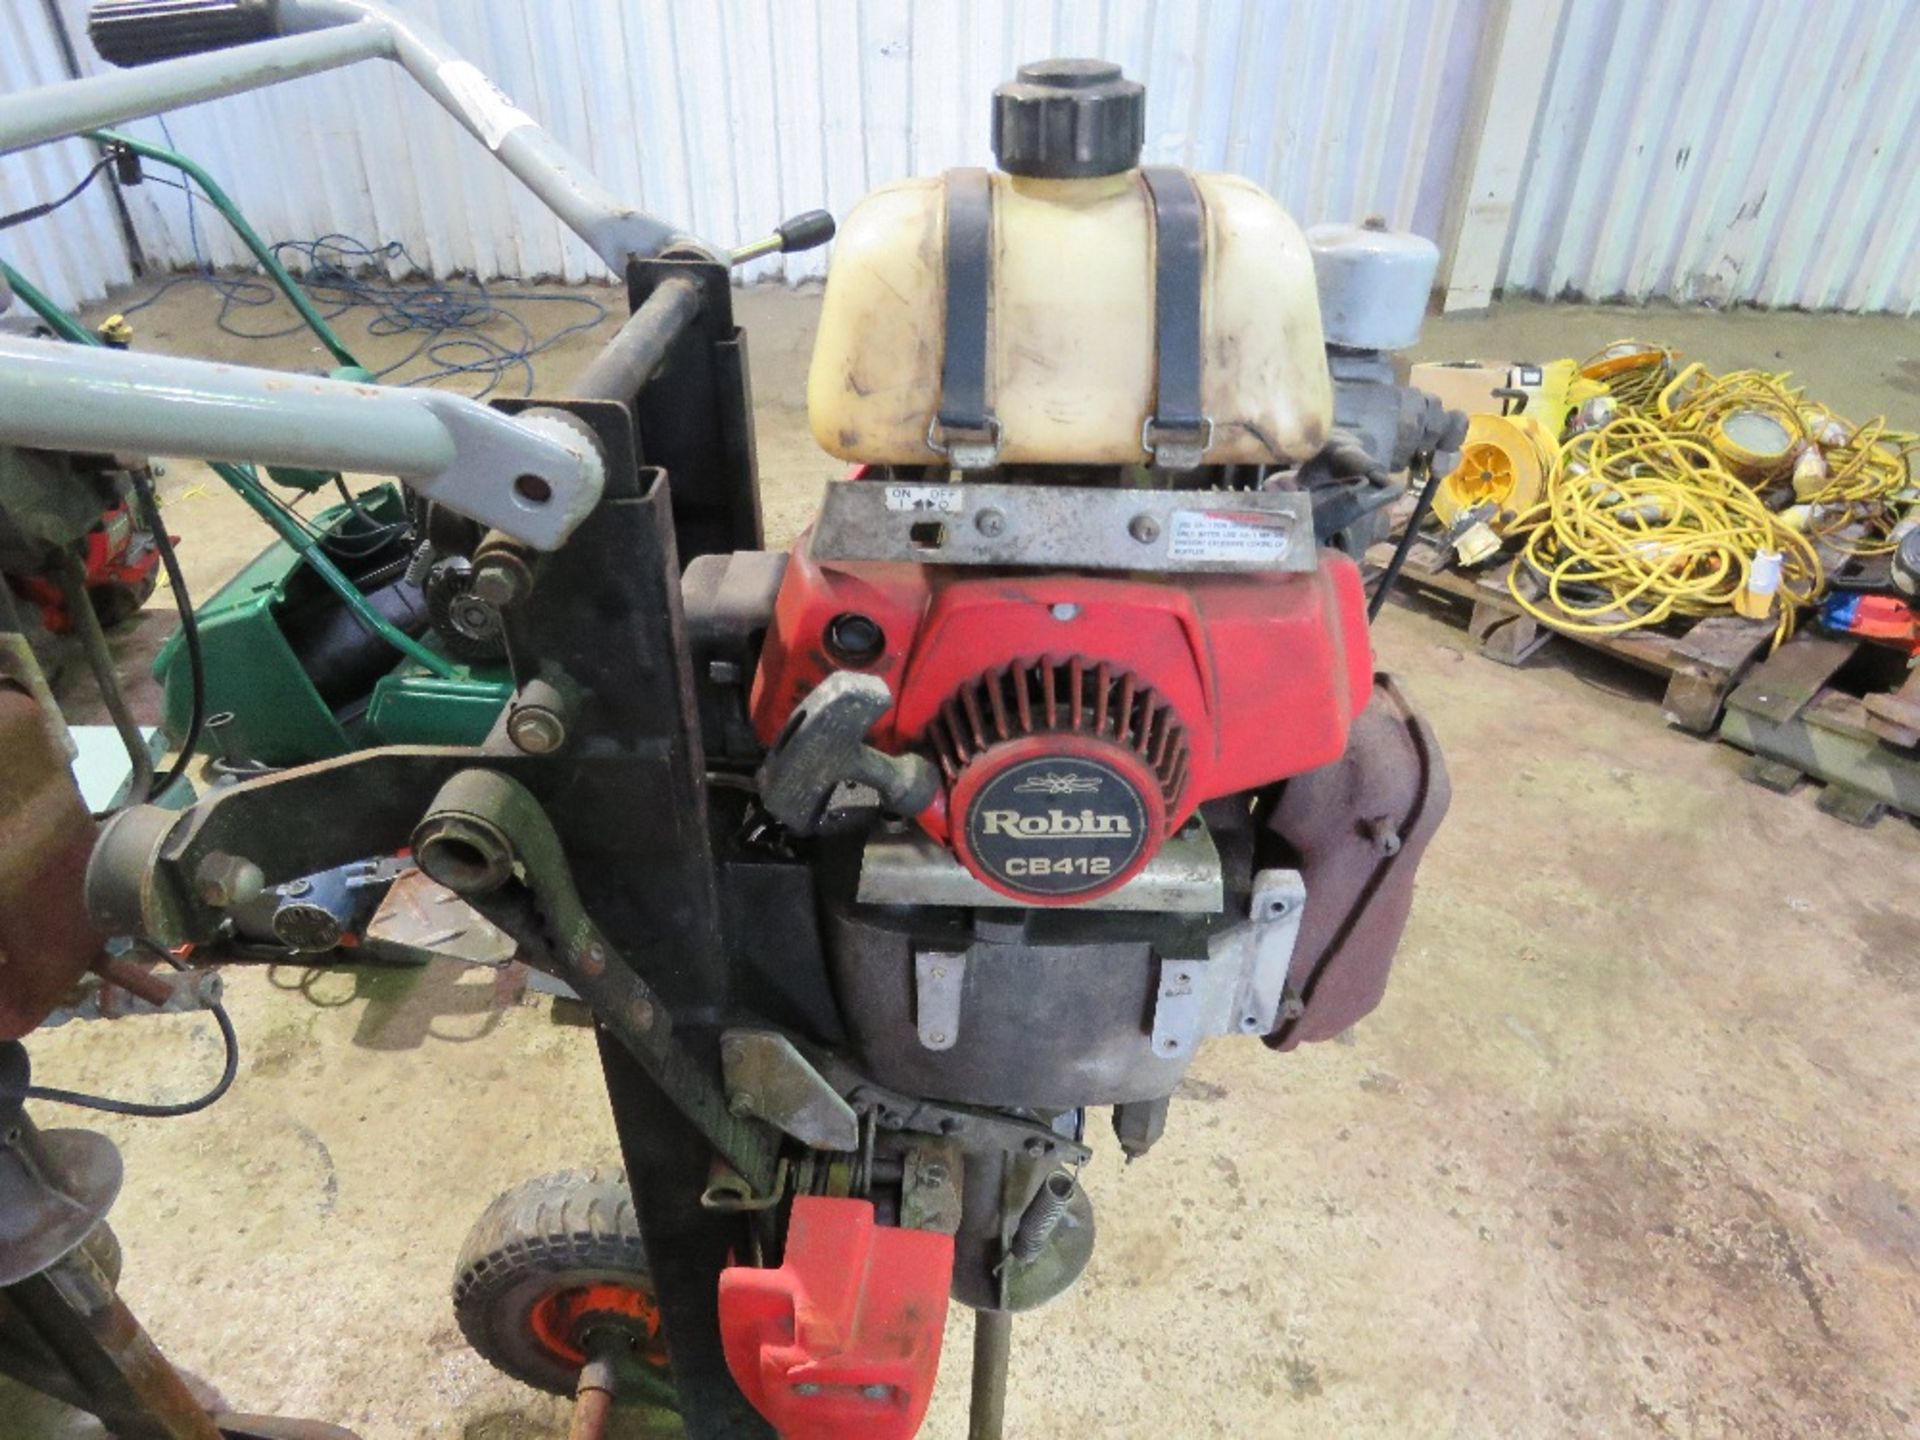 PETROL ENGINED SOIL AERATOR SPIKE UNIT, WITH ONBOARD COMPRESSOR ON WHEELS. - Image 3 of 7